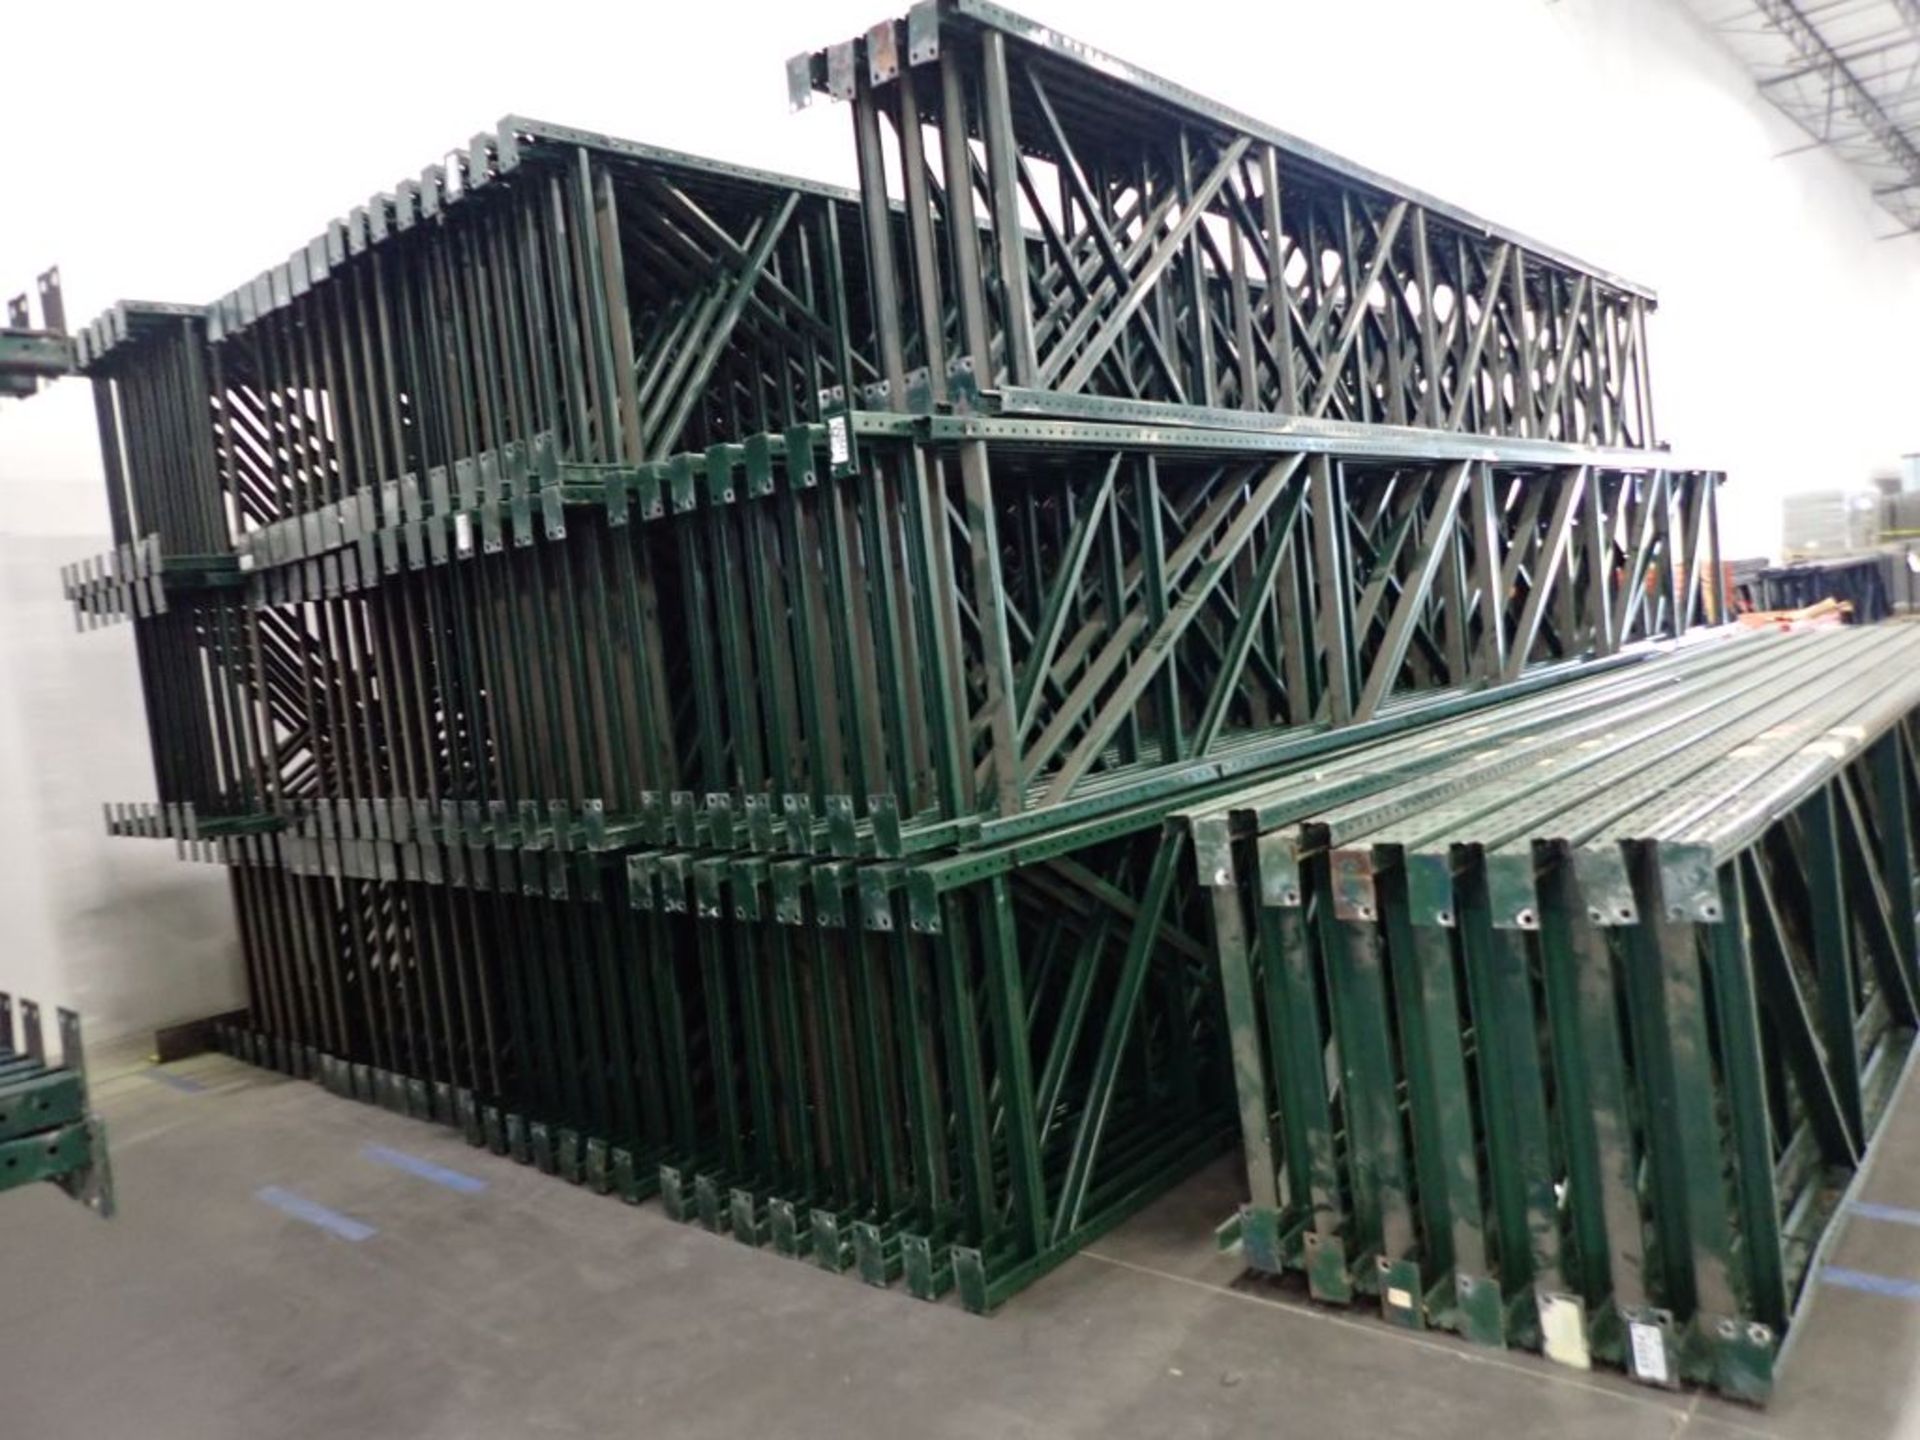 Lot of (15) 22' RUR Slotted Uprights - Image 4 of 5